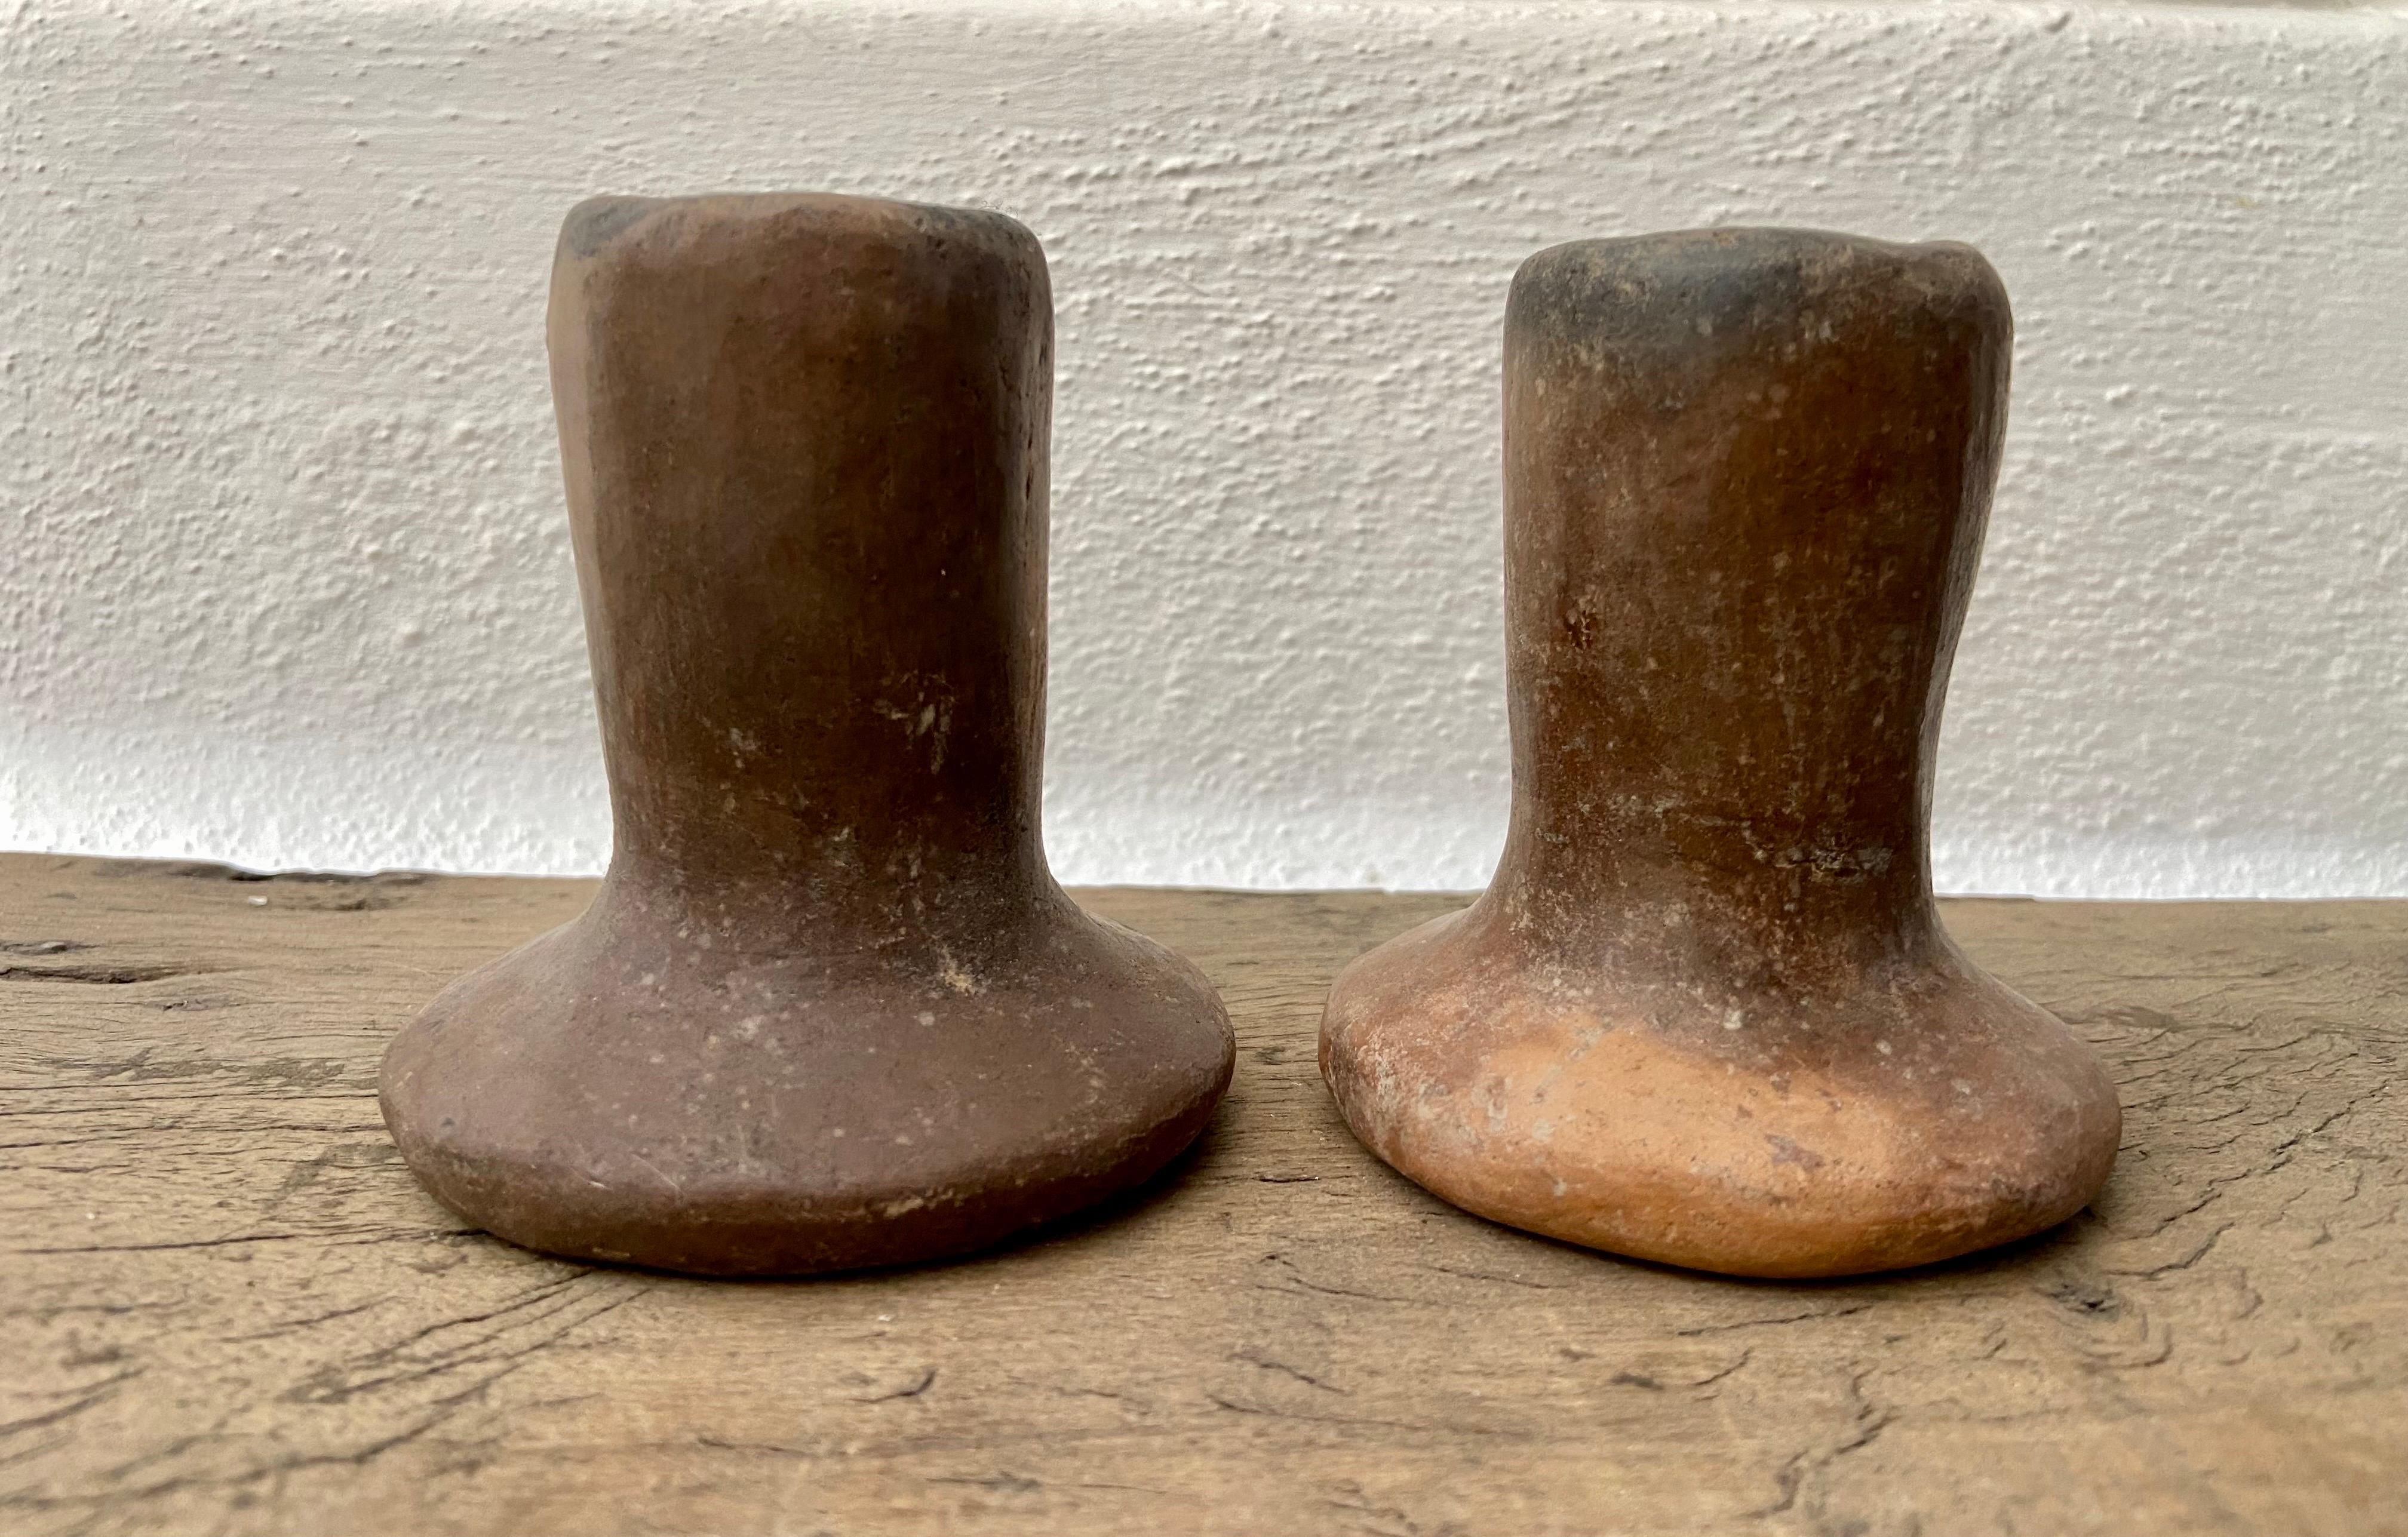 Pair of rustic ceramic candleholders from San Agustín Oapan, Guerrero, Mexico. This style of candleholders were prominent up until the 1980's when electricity was established in the town.